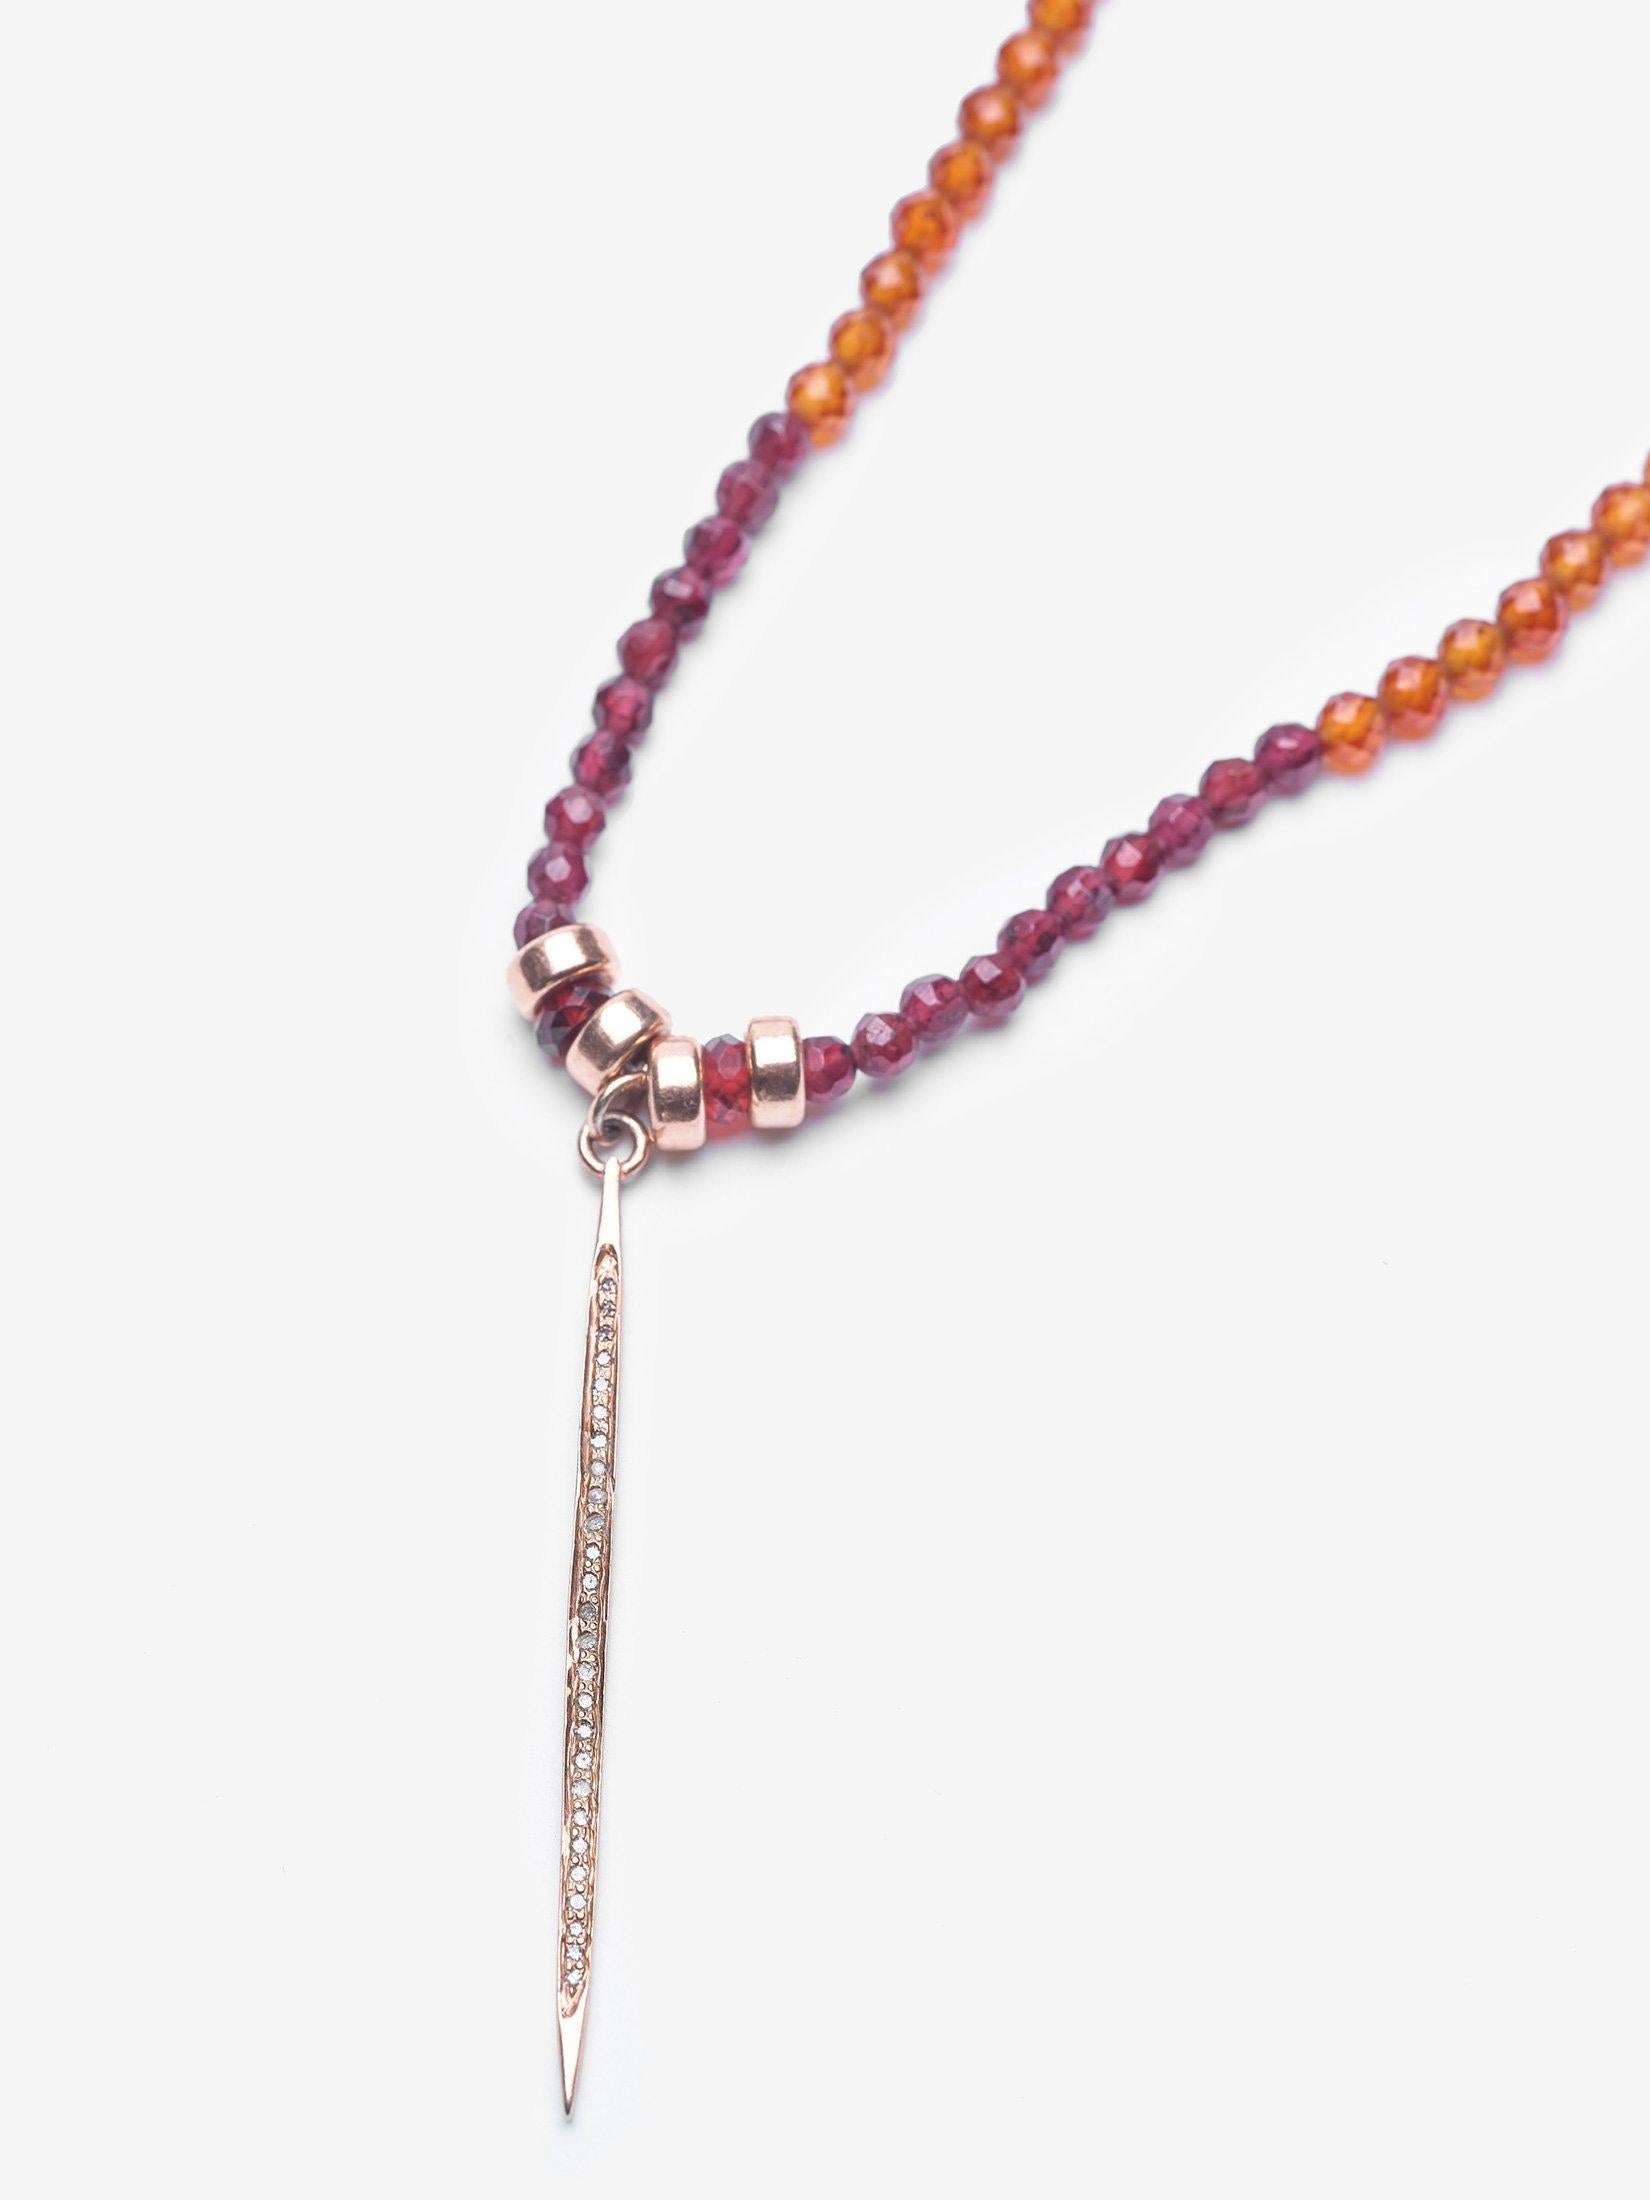 A garnet and pavé diamond necklace is a must-have in your jewelry collection. The warm autumn stones are accented with rose gold.  The variations of garnet and citrine are incredible purifiers for the body.  The necklace is accented with with a pave